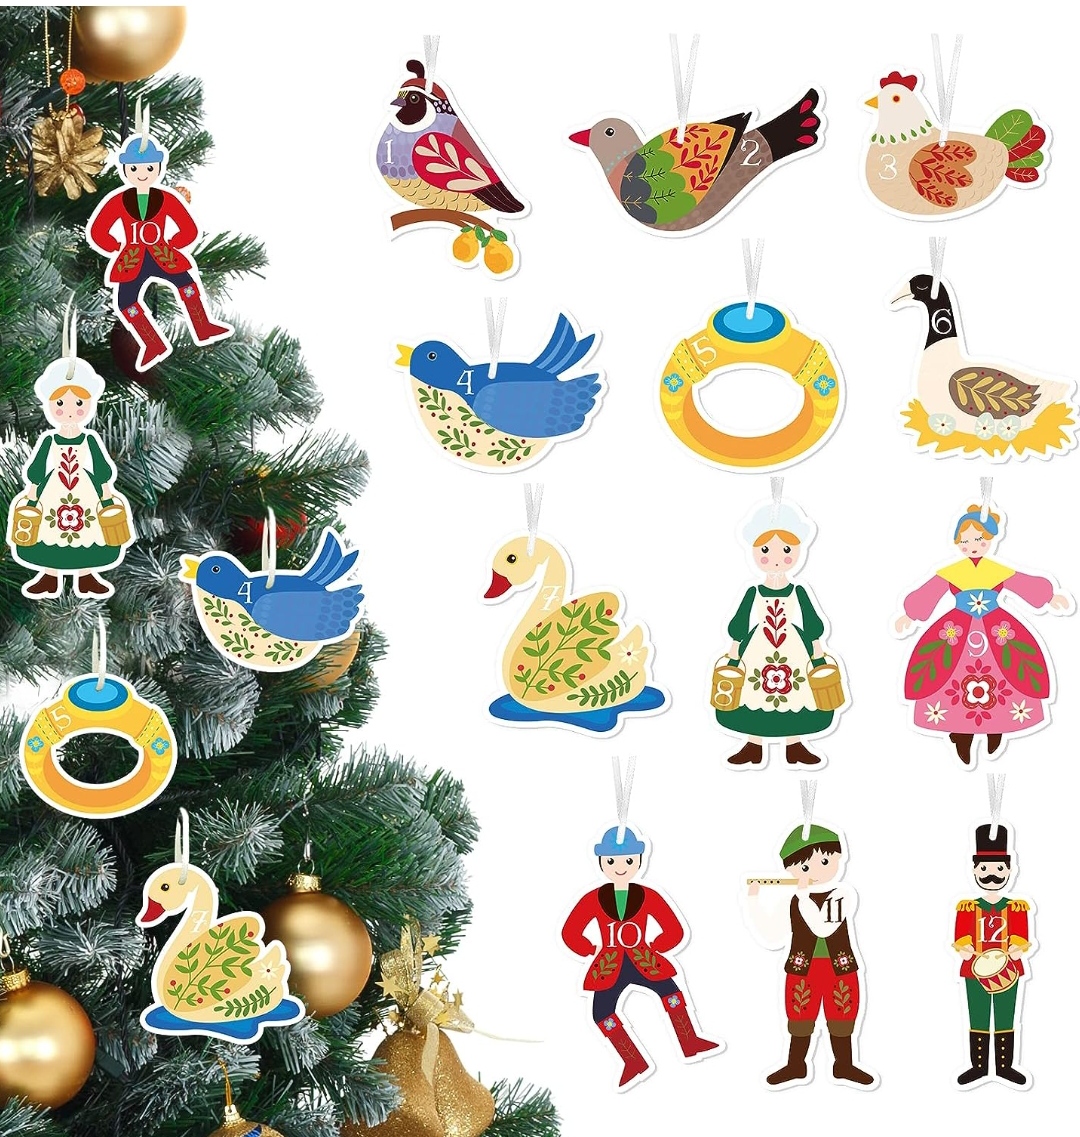 tuitessine 12 days of christmas ornaments set the top 14 funny 12 days of christmas gift ideas